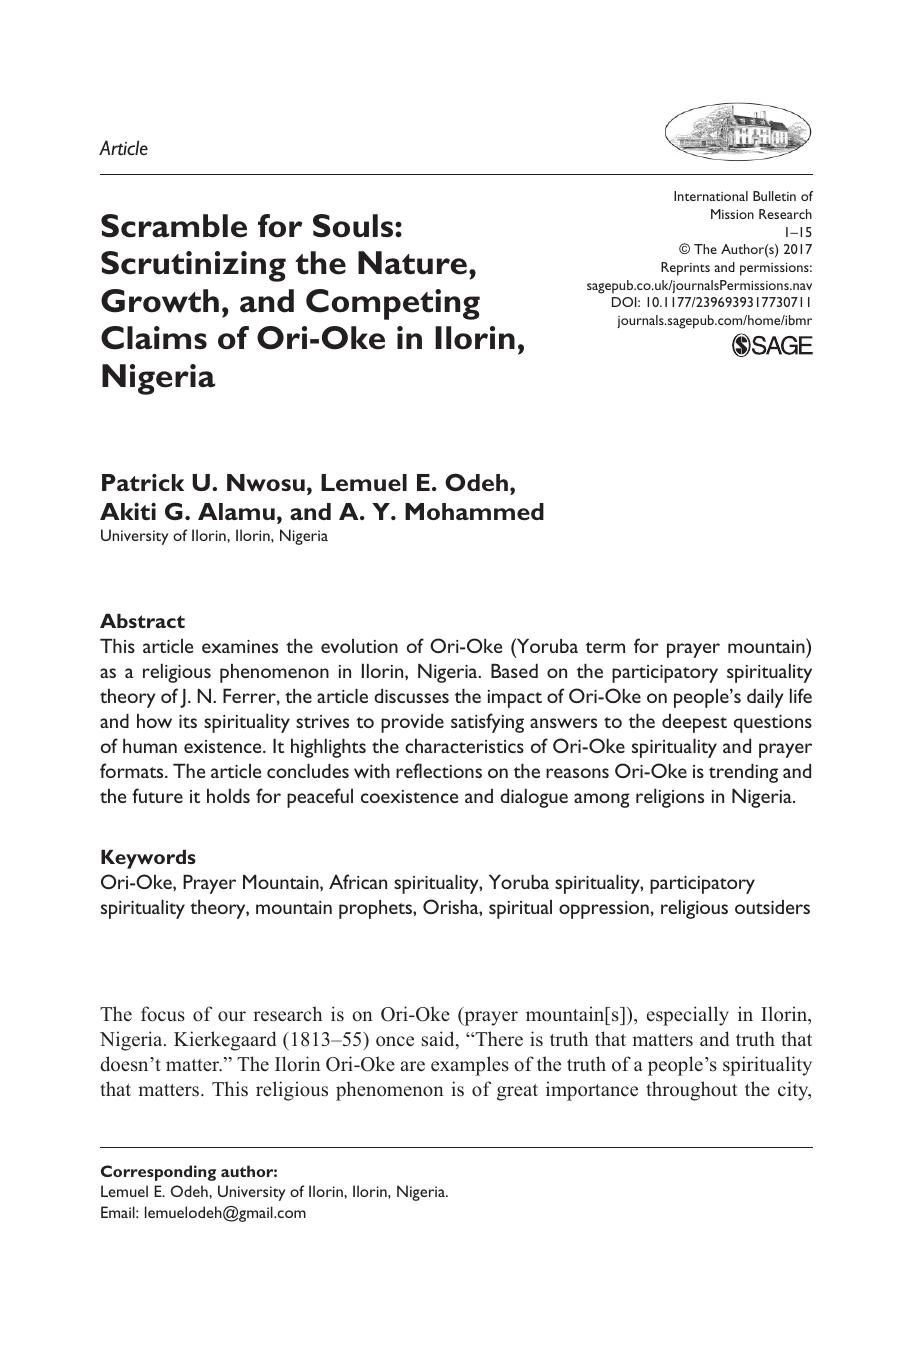 Scramble for Souls Scrutinizing the Nature, Growth, and Competing Claims of Ori-Oke in Ilorin, Nigeria